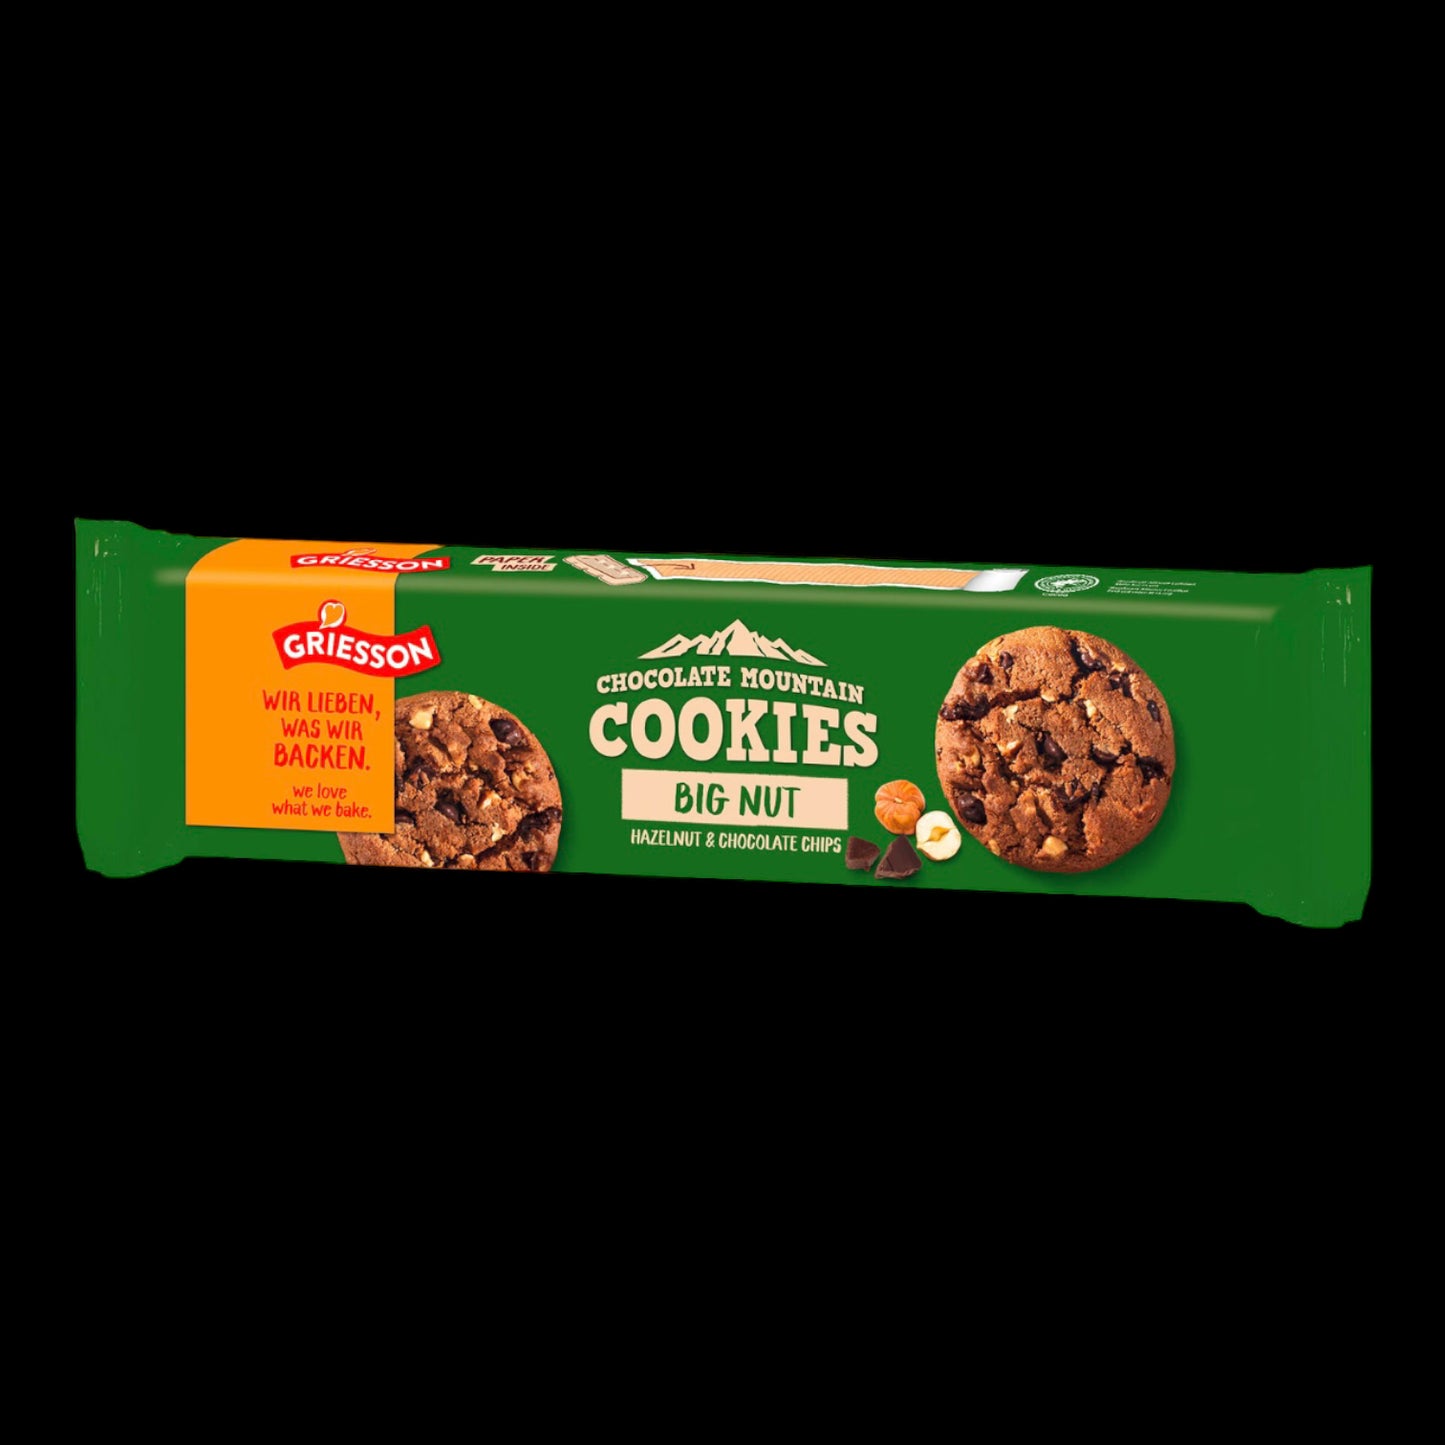 Griesson Chocolate Mountain Cookies Big Nut 150g